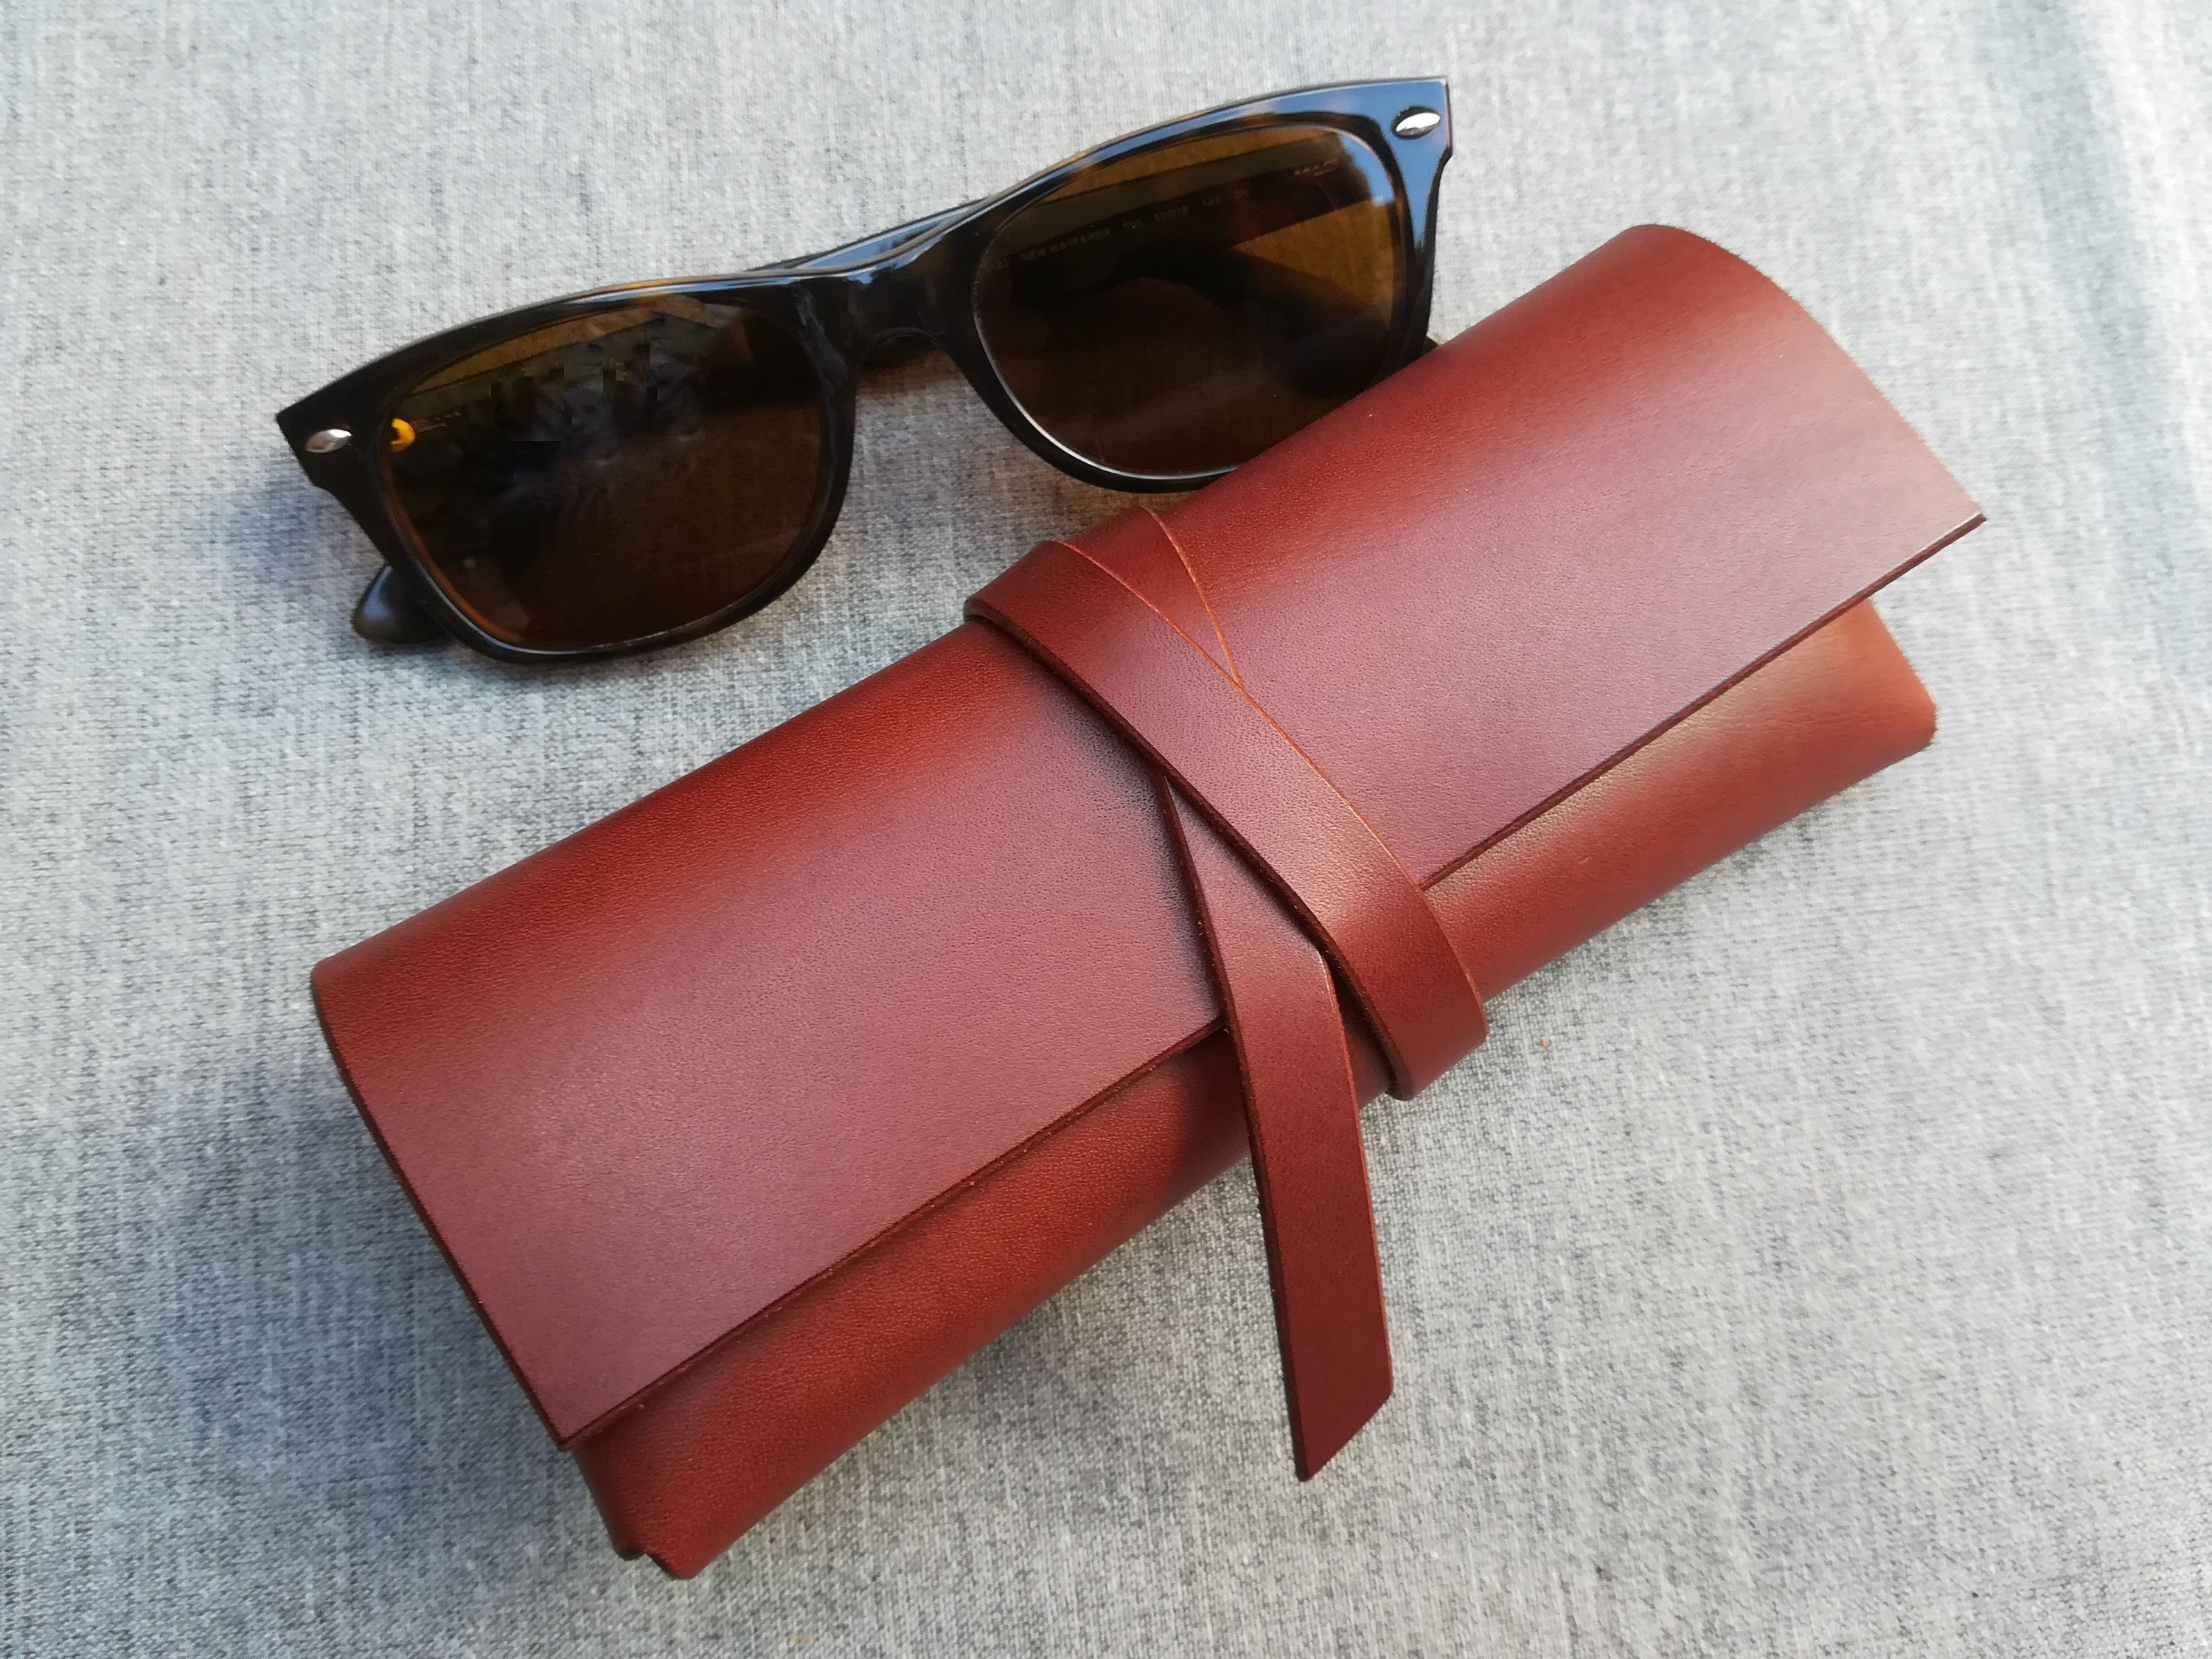 Ray Ban Case-leather Sunglasses Case-glasses Case Whiskey Saddle  Leather-leather Reinforced Glasses Case-personalized Glasses Protector 